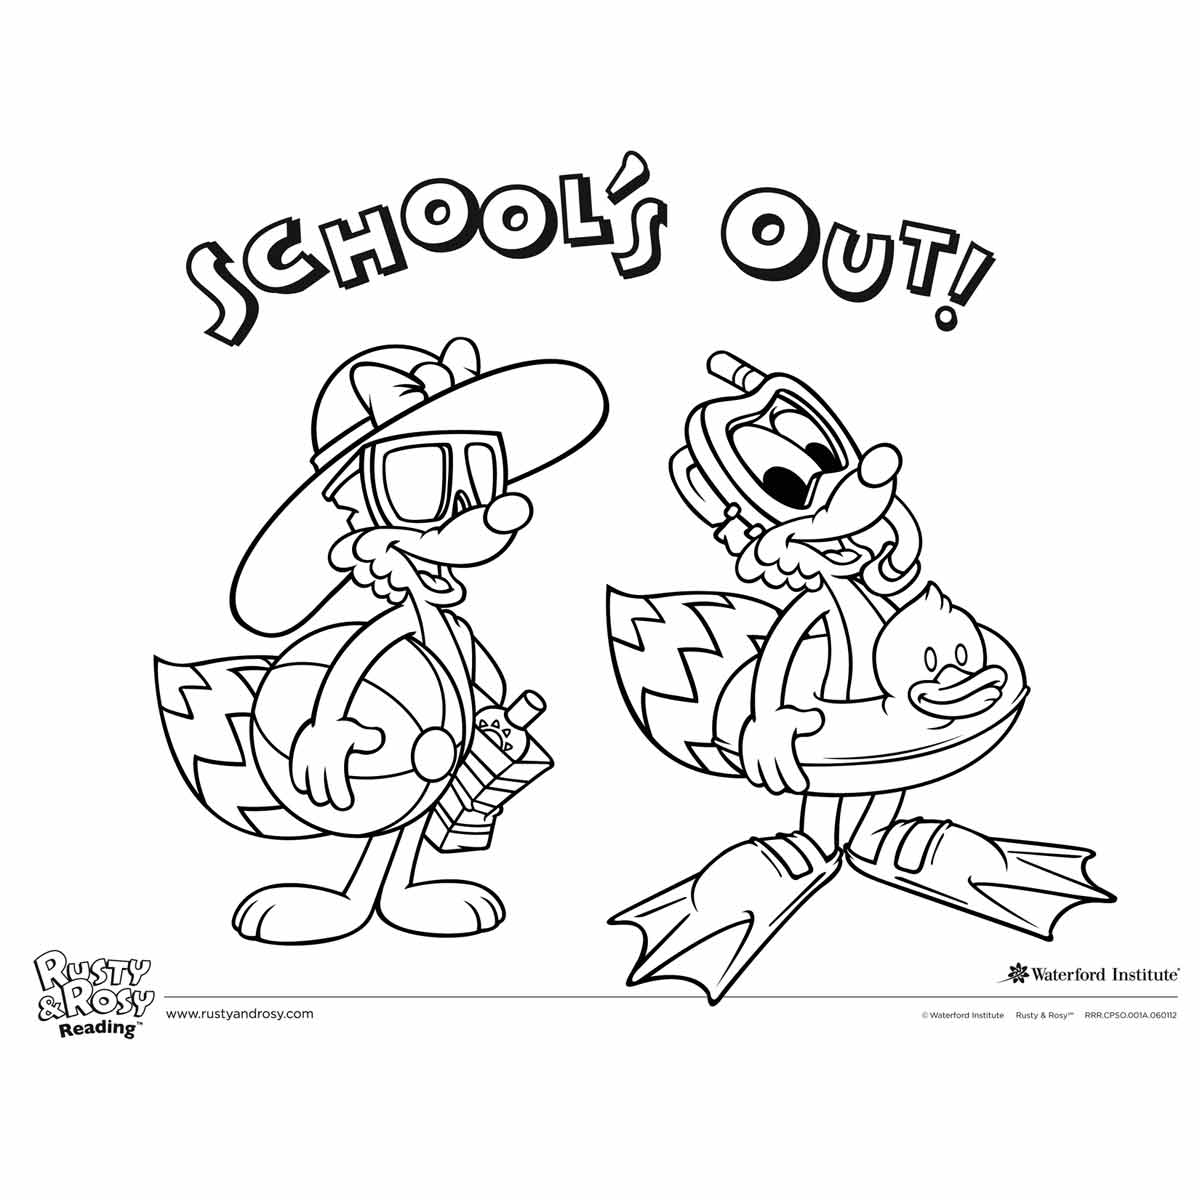 Free Cartoon School's Out Coloring Pages printable